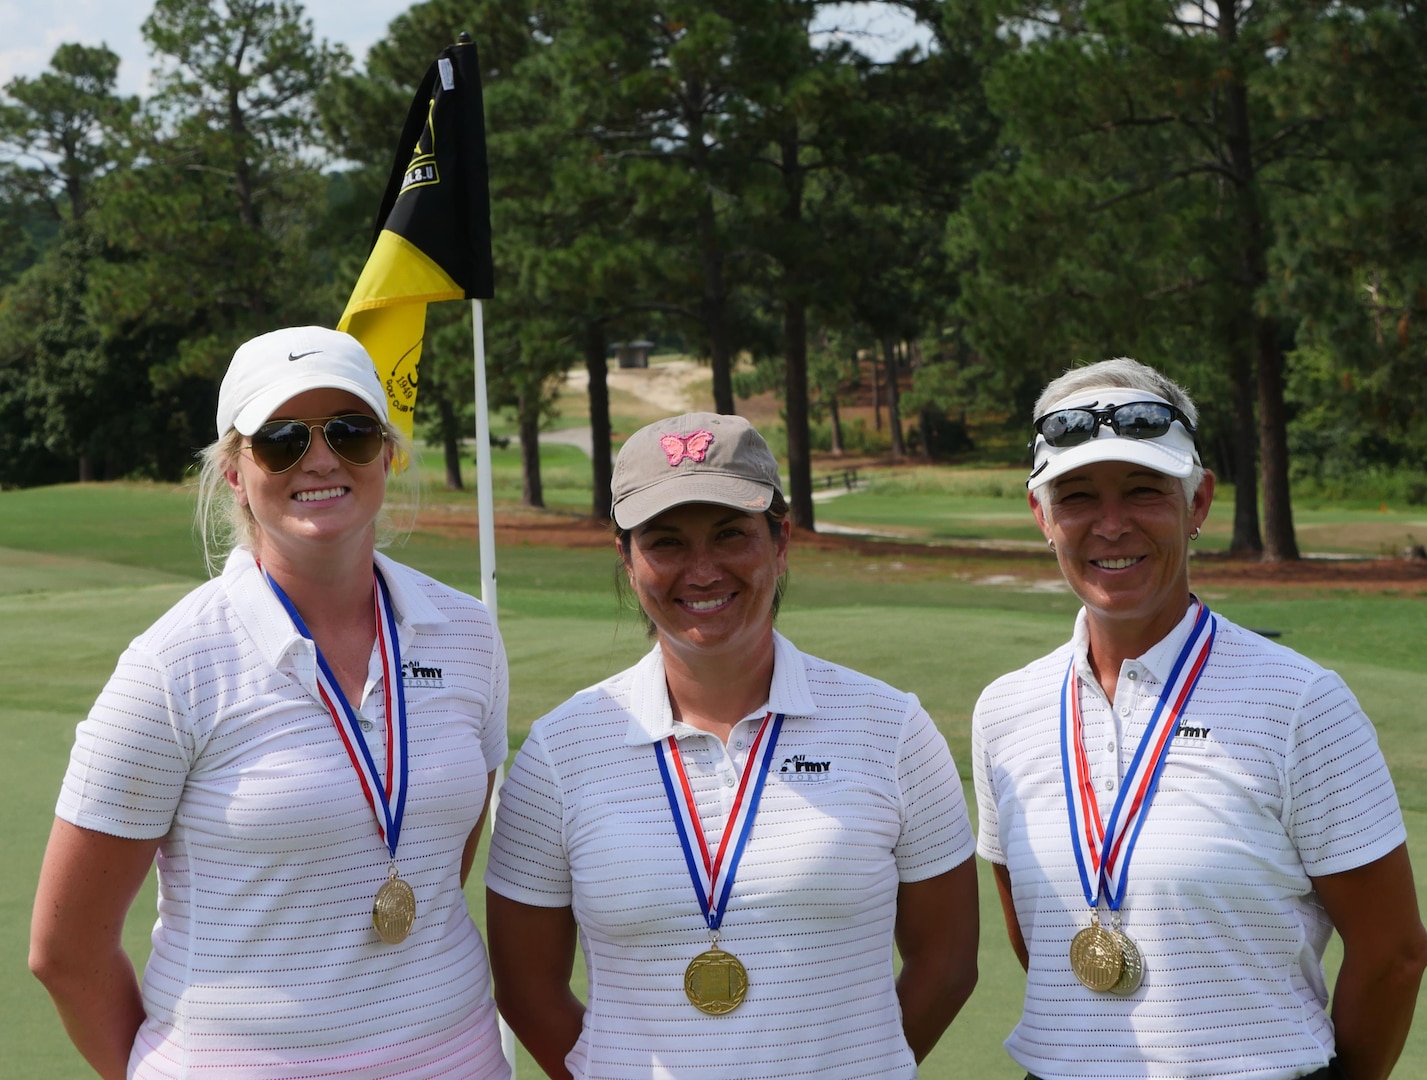 2016 Armed Forces Golf Championship Men's Champions, the United States Army.  The Armed Forces Championship was hosted at Fort Jackson, S.C. 20-23 August. Army Roster: Lt. Col. Sunny Mitchell; Spc. Brenna Forsberg; and Col Shauna Synder.